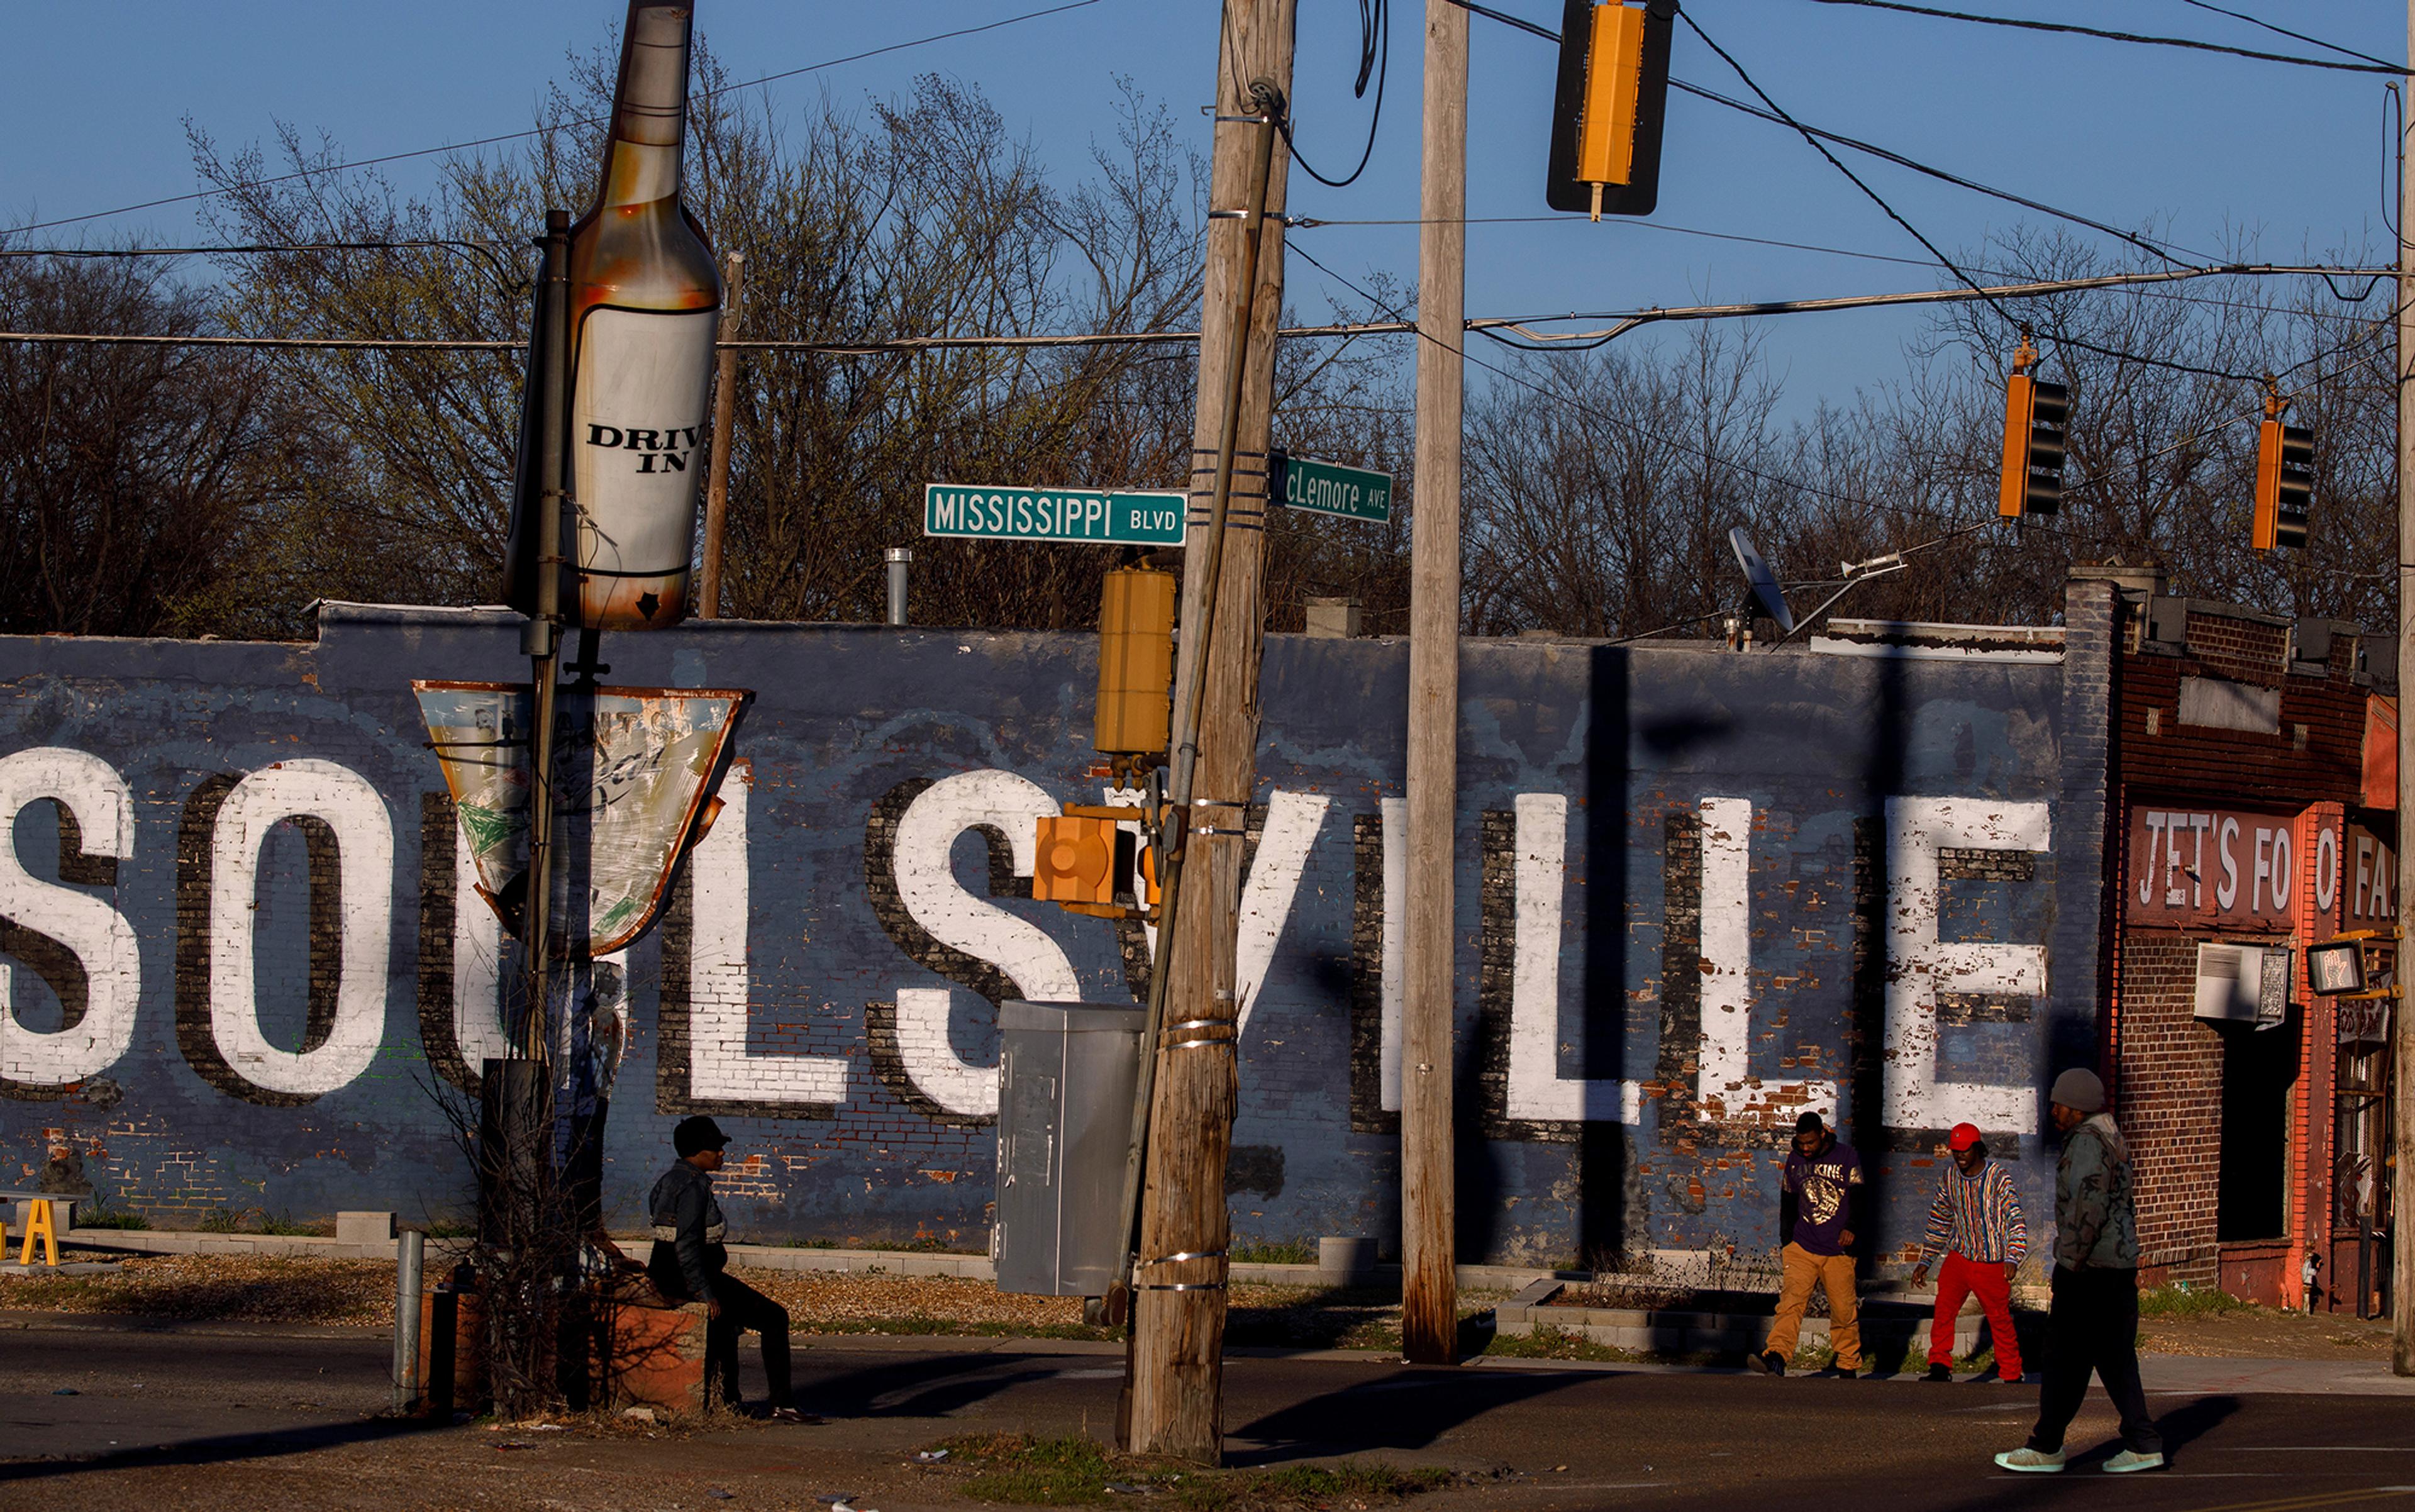 A street intersection; a wall is painted with the word Soulsville in large letters with peeling paint